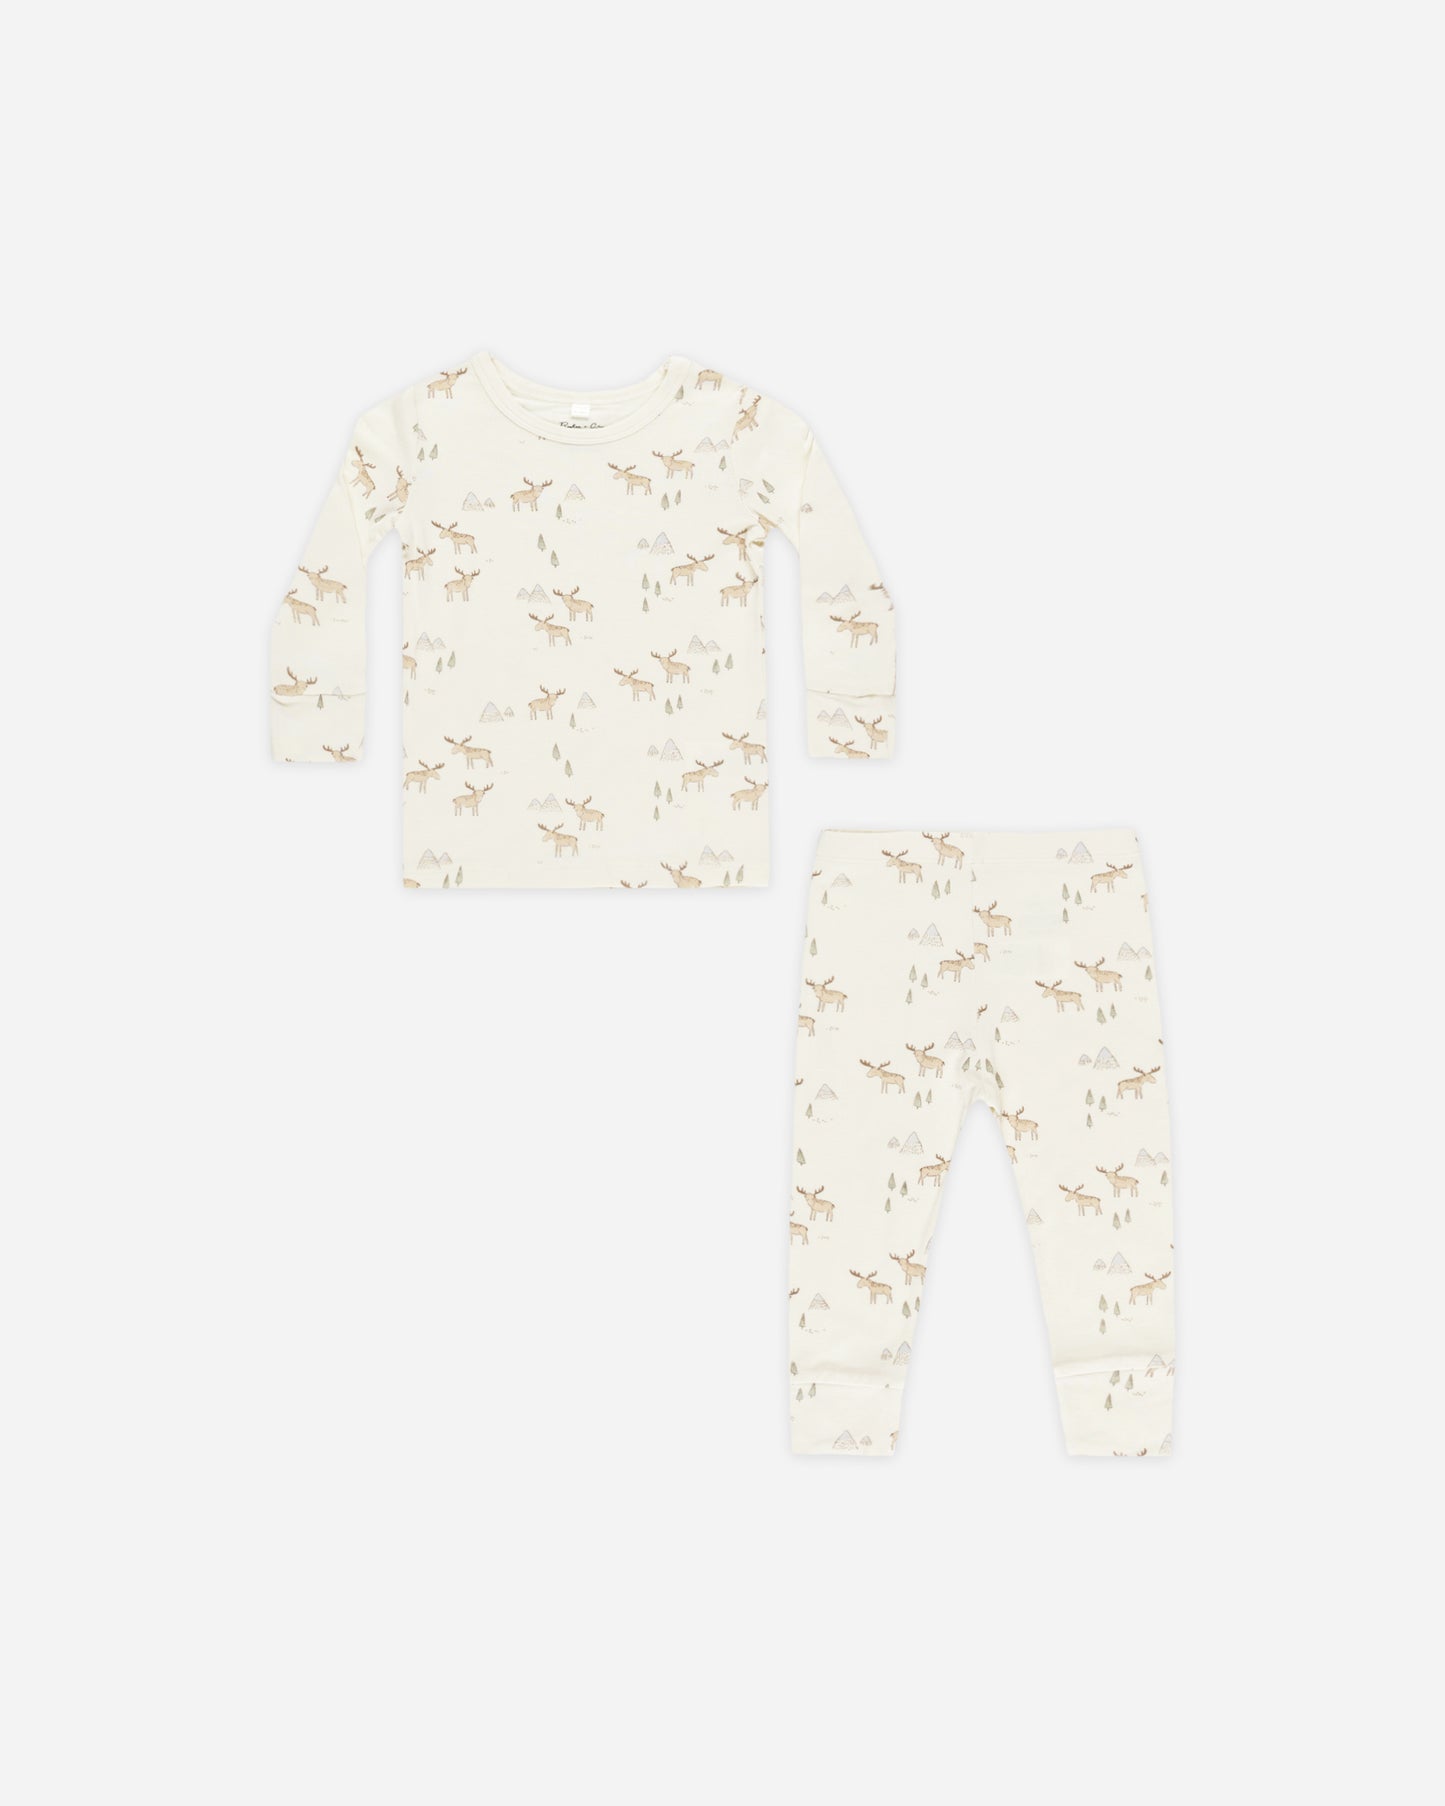 Long Sleeve Pajamas || Moose - Rylee + Cru | Kids Clothes | Trendy Baby Clothes | Modern Infant Outfits |